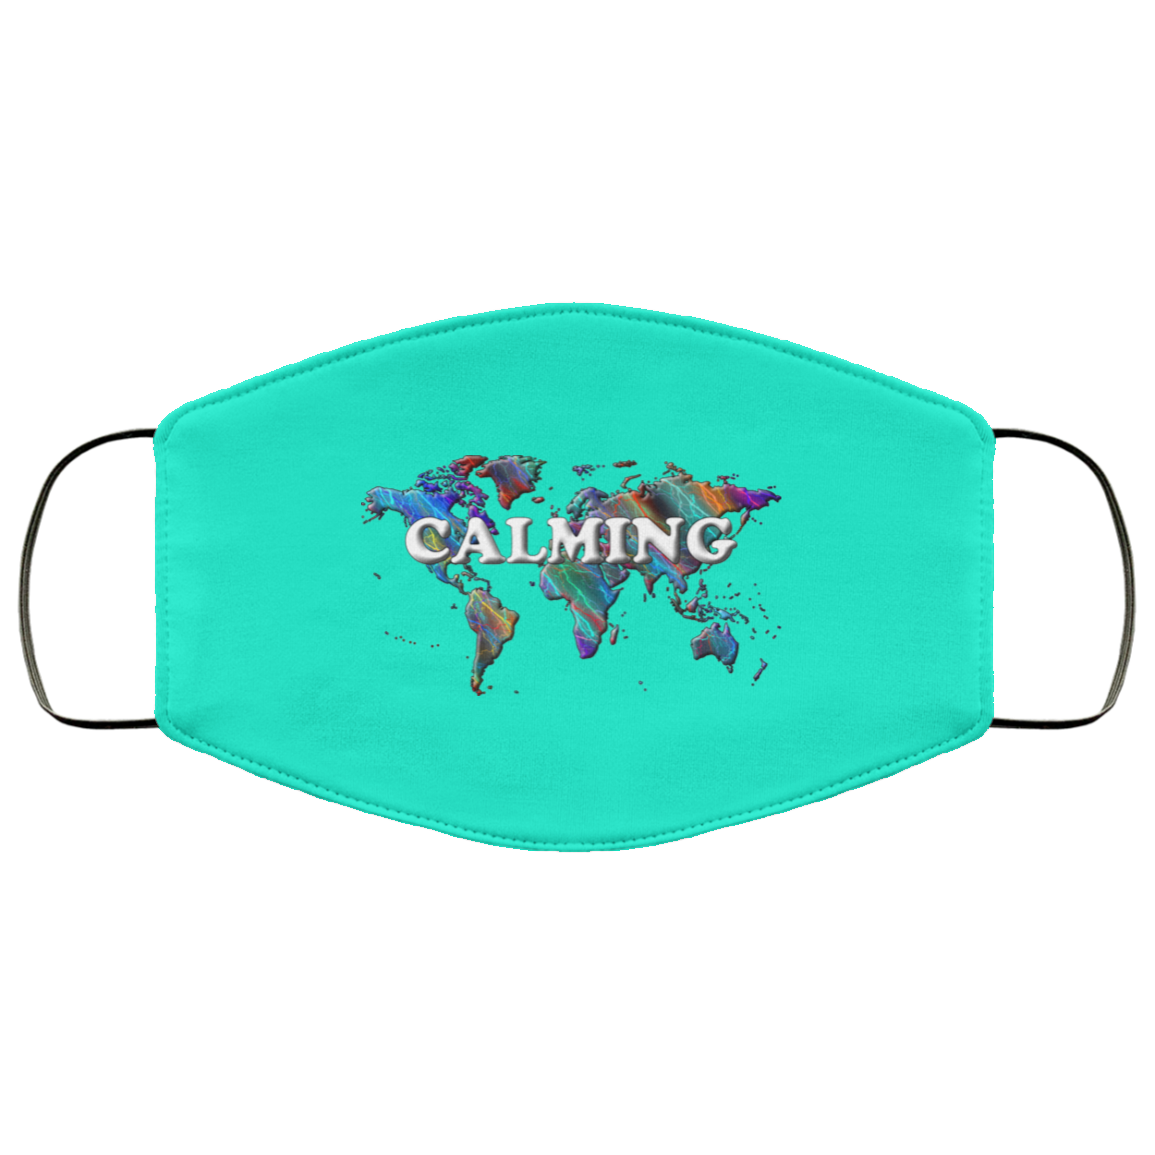 Calming 2 Layer Protective Mask